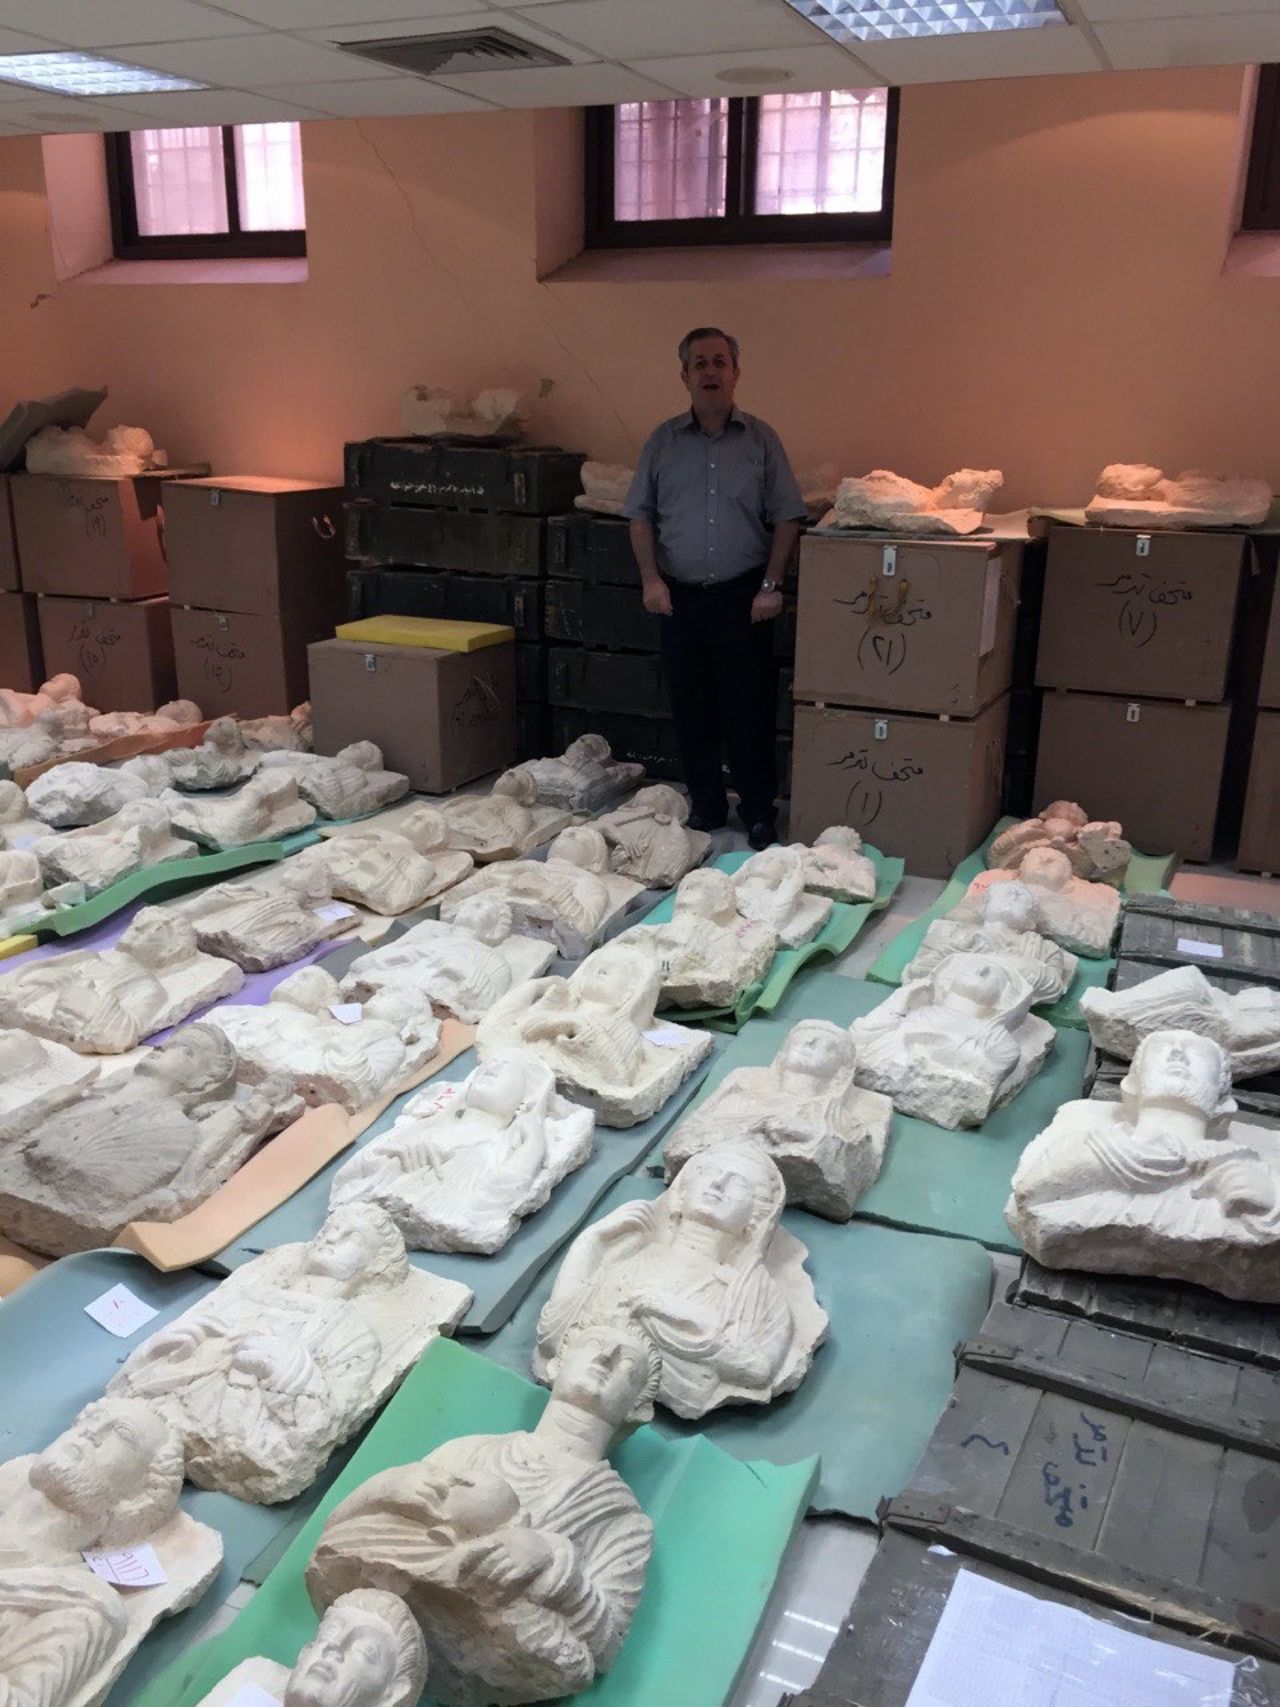 Abdulkarim leads a team trying to prevent Syria's cultural heritage from being destroyed. Earlier this year they managed to rescue hundreds of Roman busts from Palmyra before ISIS seized the ancient city.  